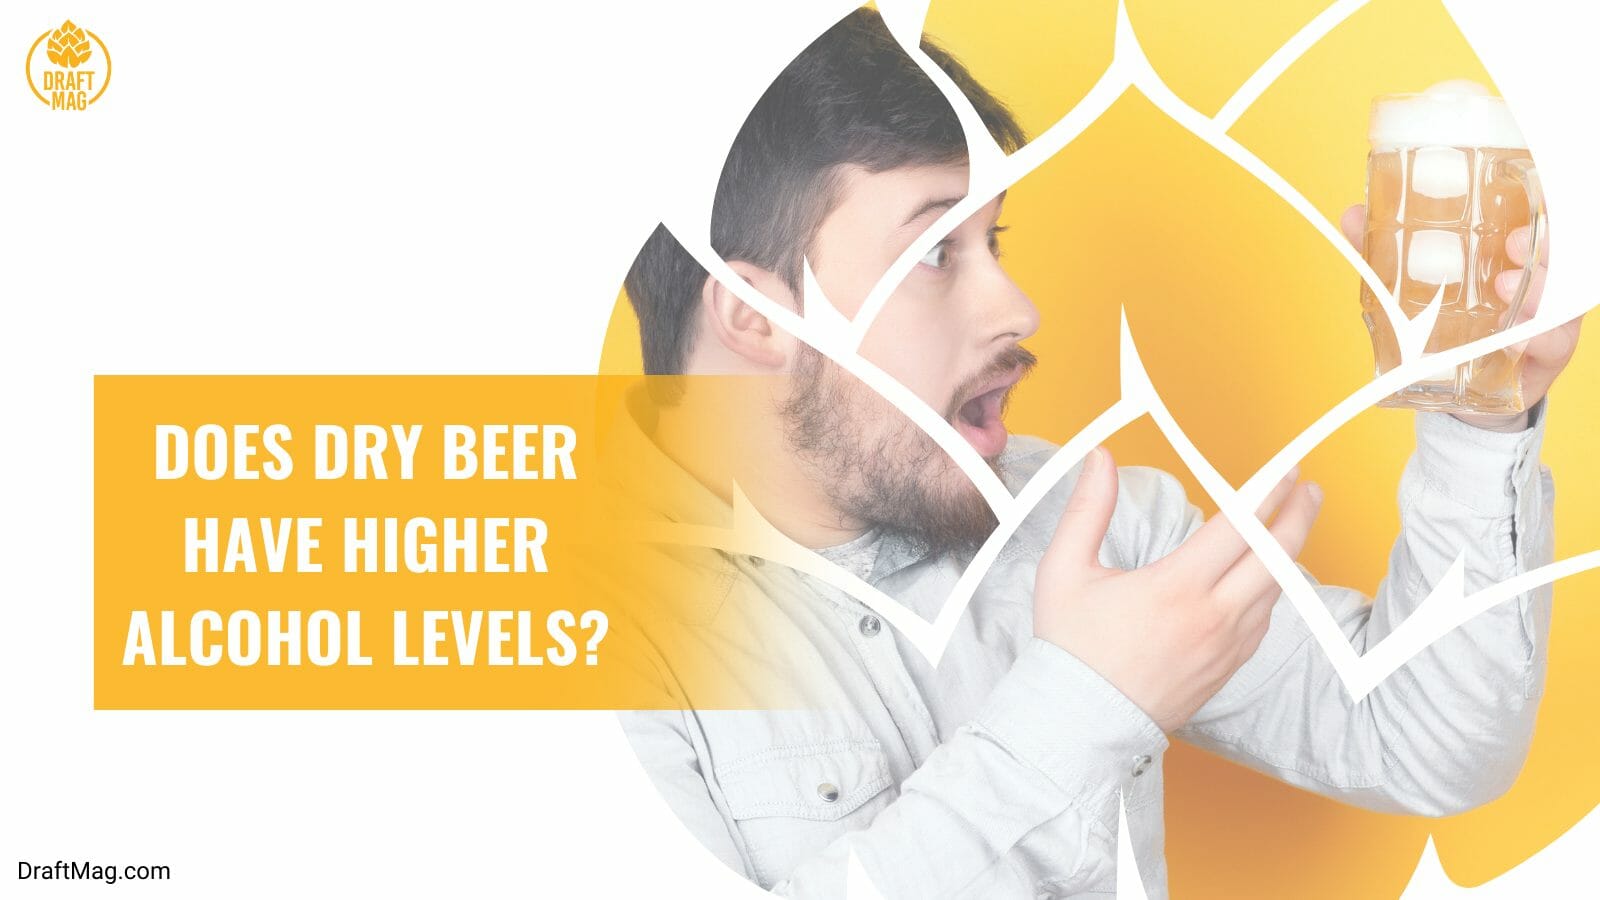 Alcohol levels of dry beer